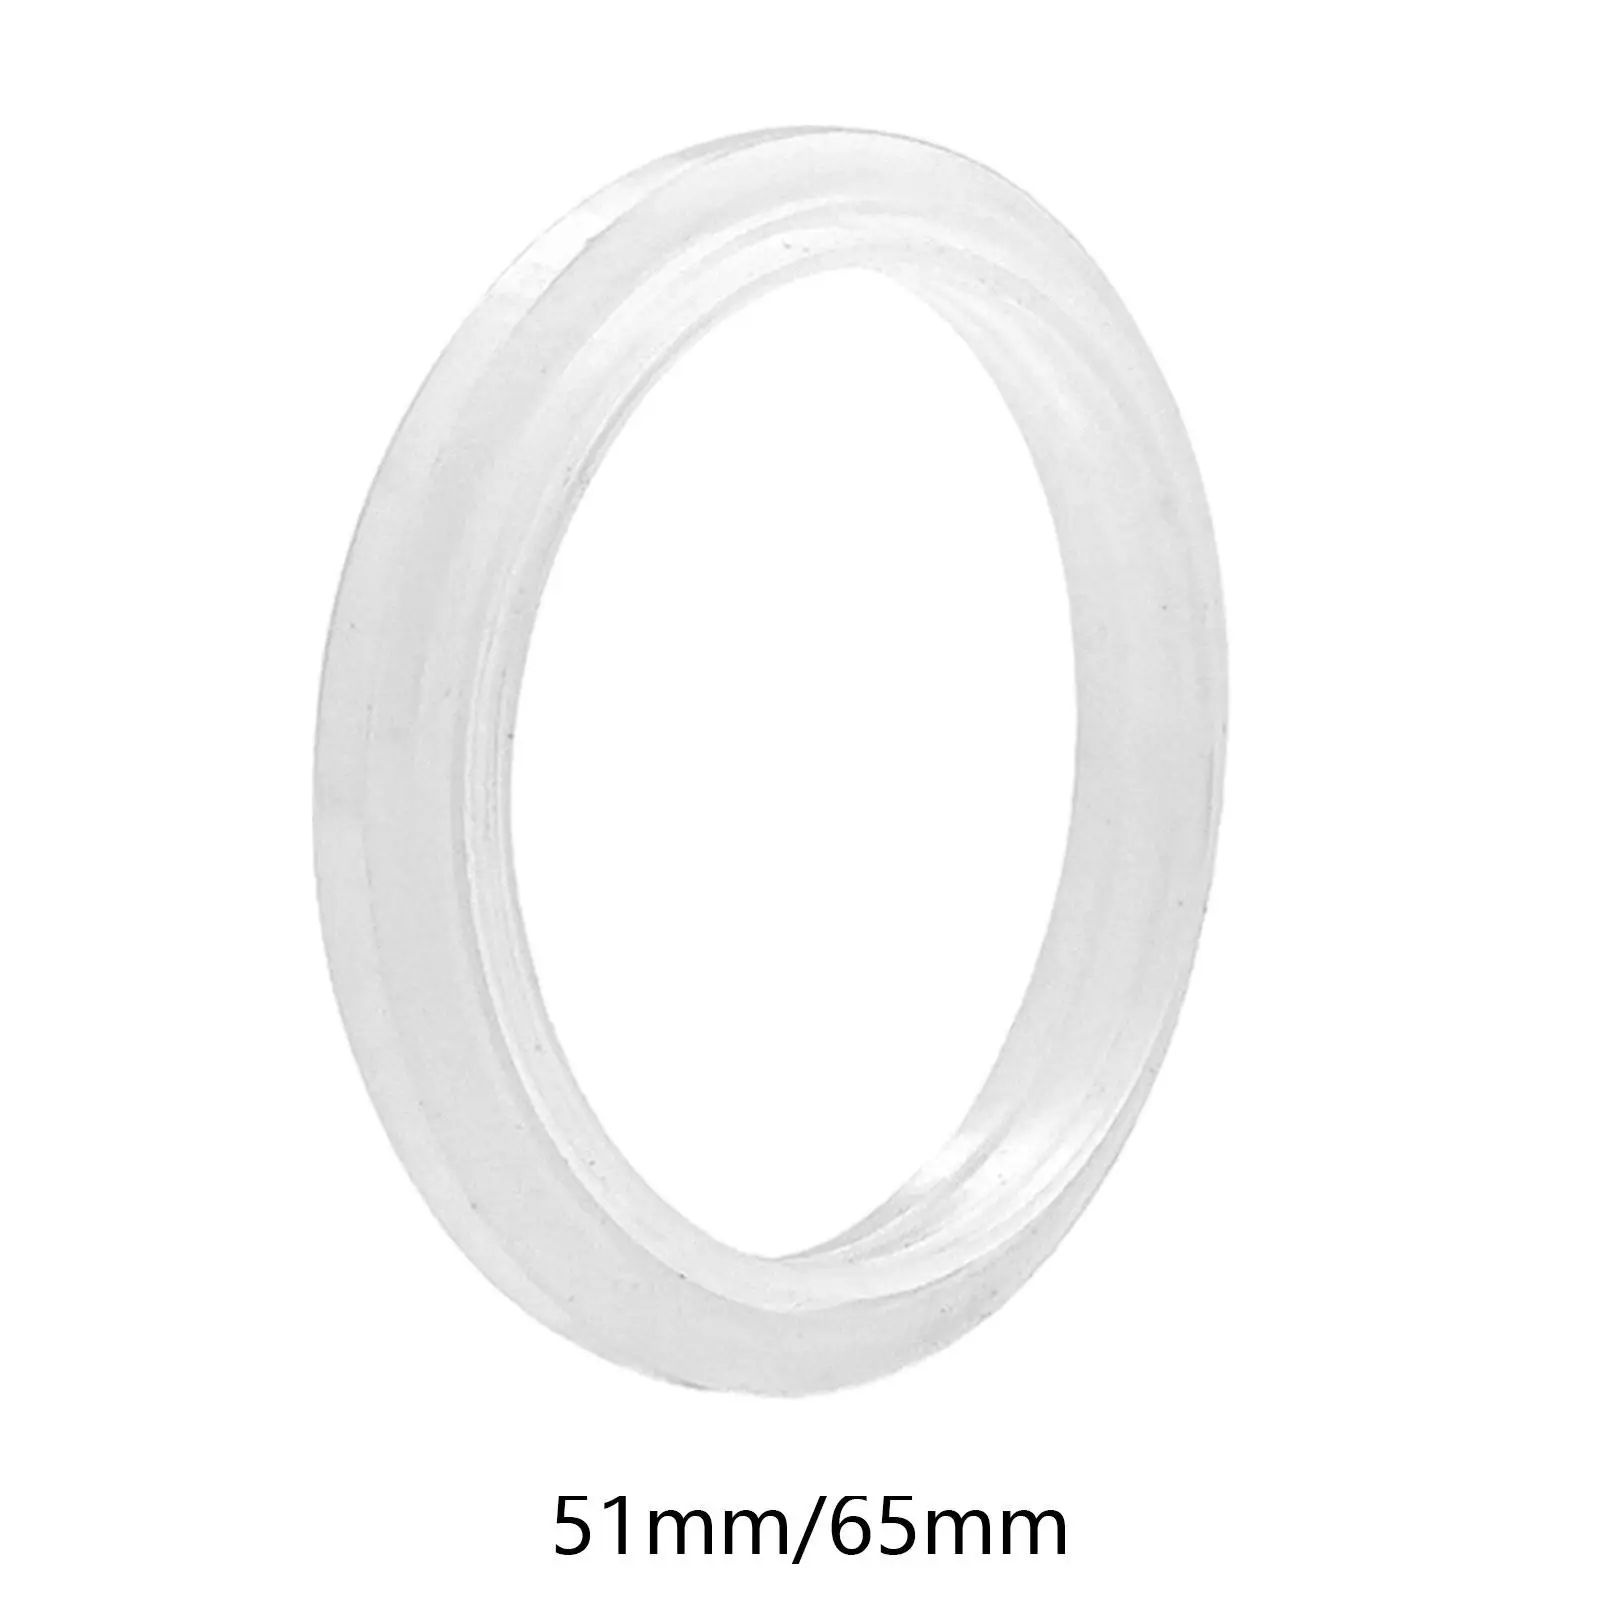 Silicone Gaskets Gasket Rings, Durable Closely Fits The Mesh Screen, Coffee Maker Accs for Coffee Maker Supplies